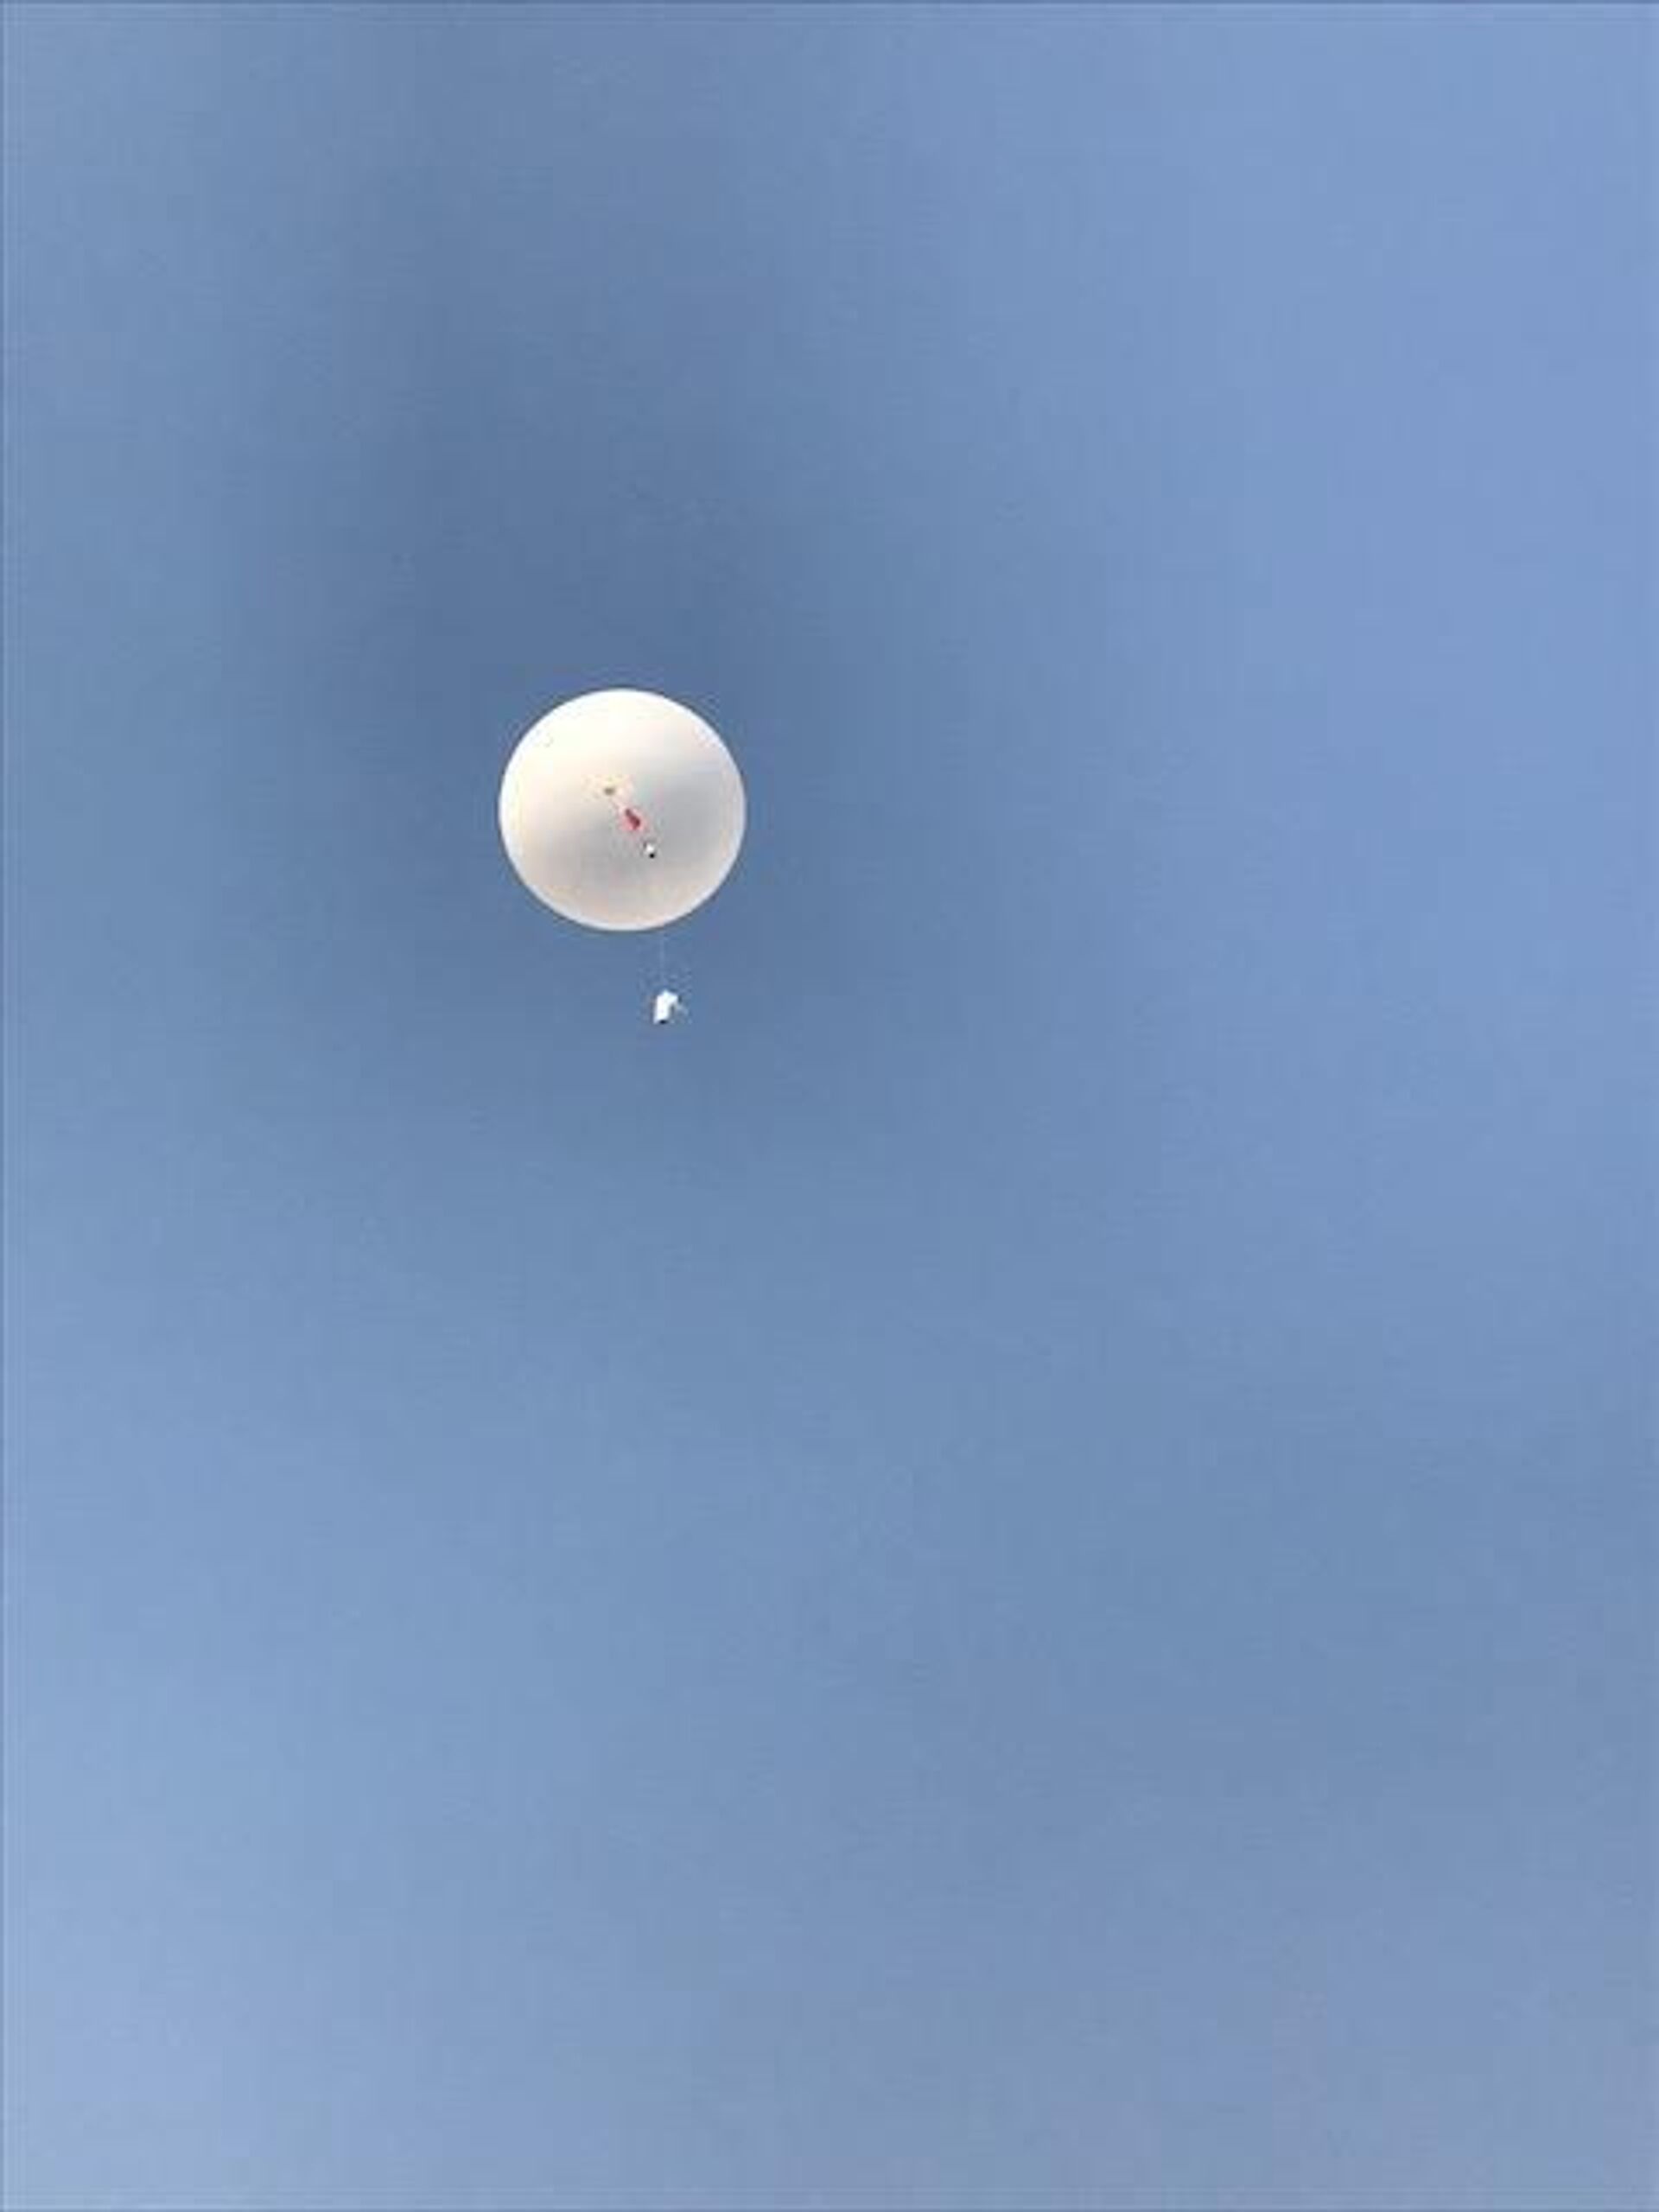 A US weather balloon launched to gather weather data close to the Meyers Fire area in Montana in September 2017 - Sputnik International, 1920, 21.02.2023